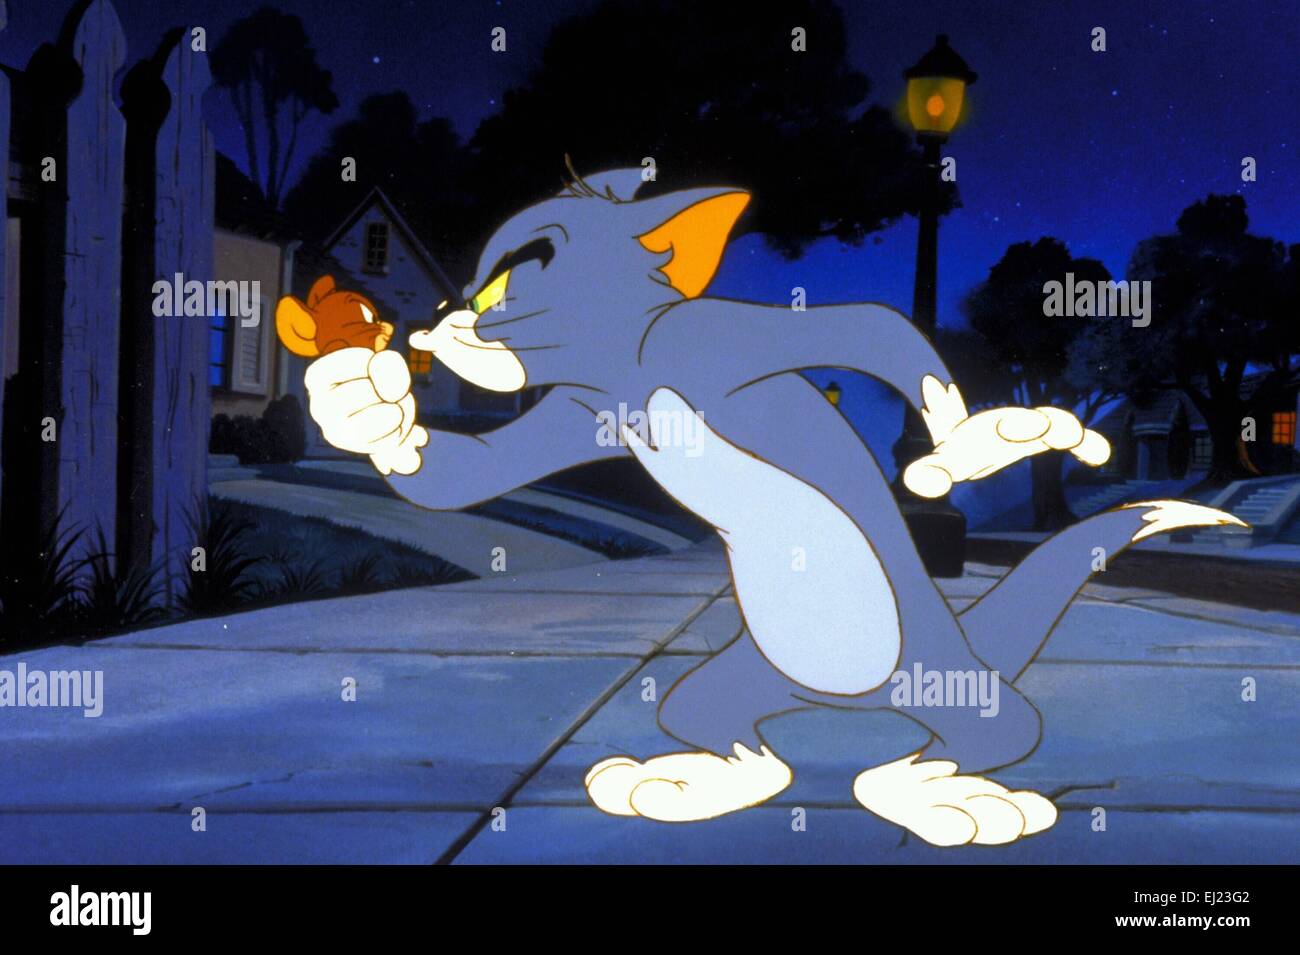 Tom jerry 1930 hi-res stock photography and images - Alamy